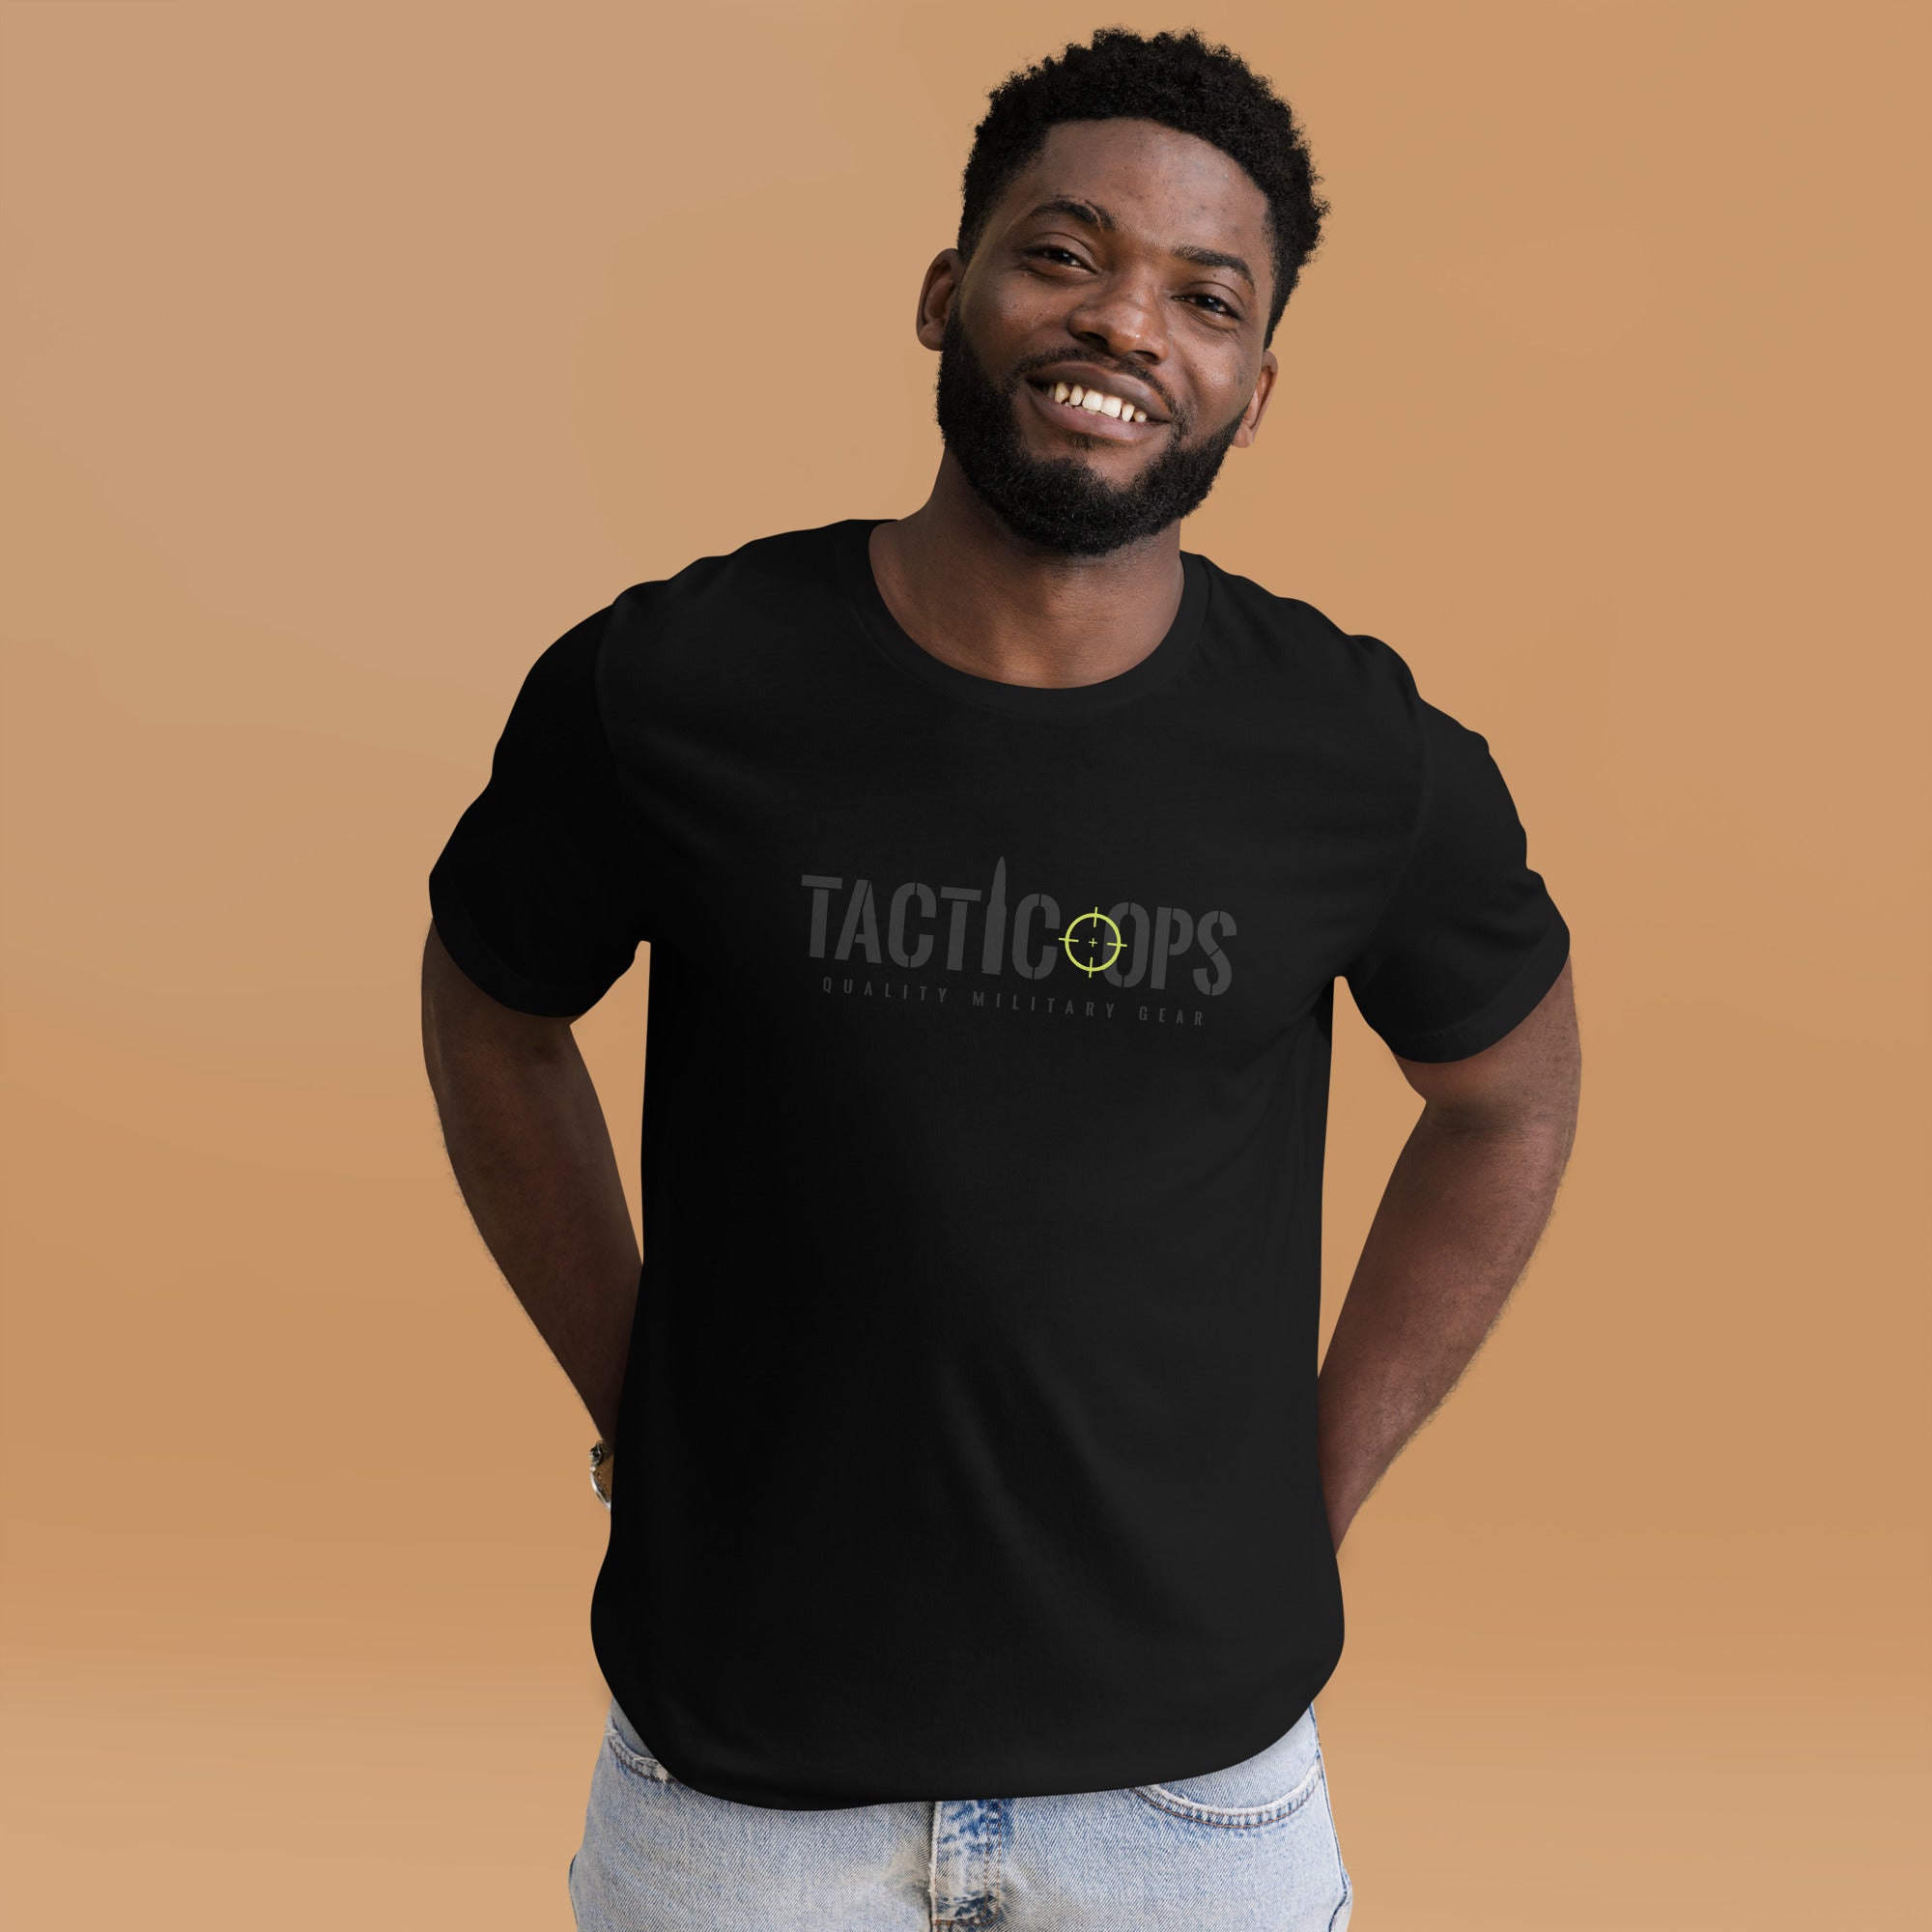 Tactic Ops T-shirt - White